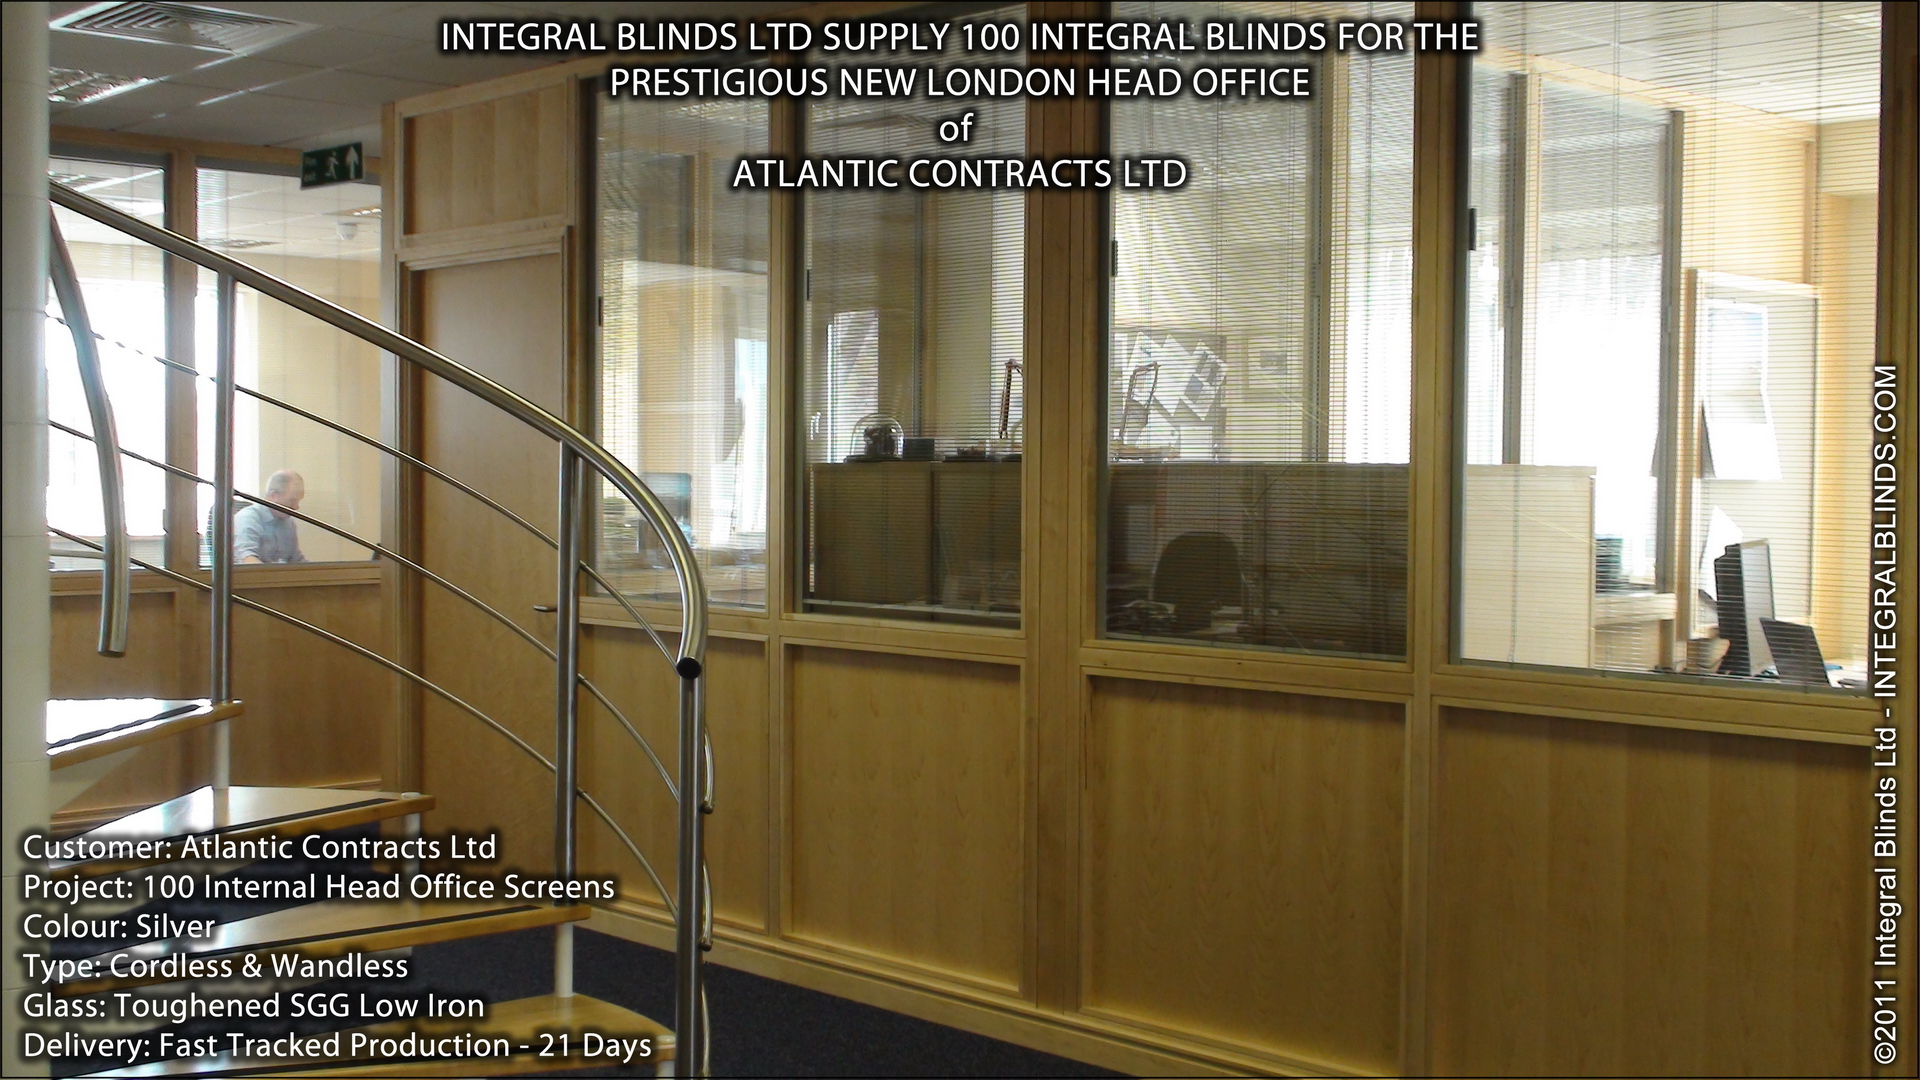 Atlantic Contracts chhose SwiftGlide Integral Blinds for their own office fit out